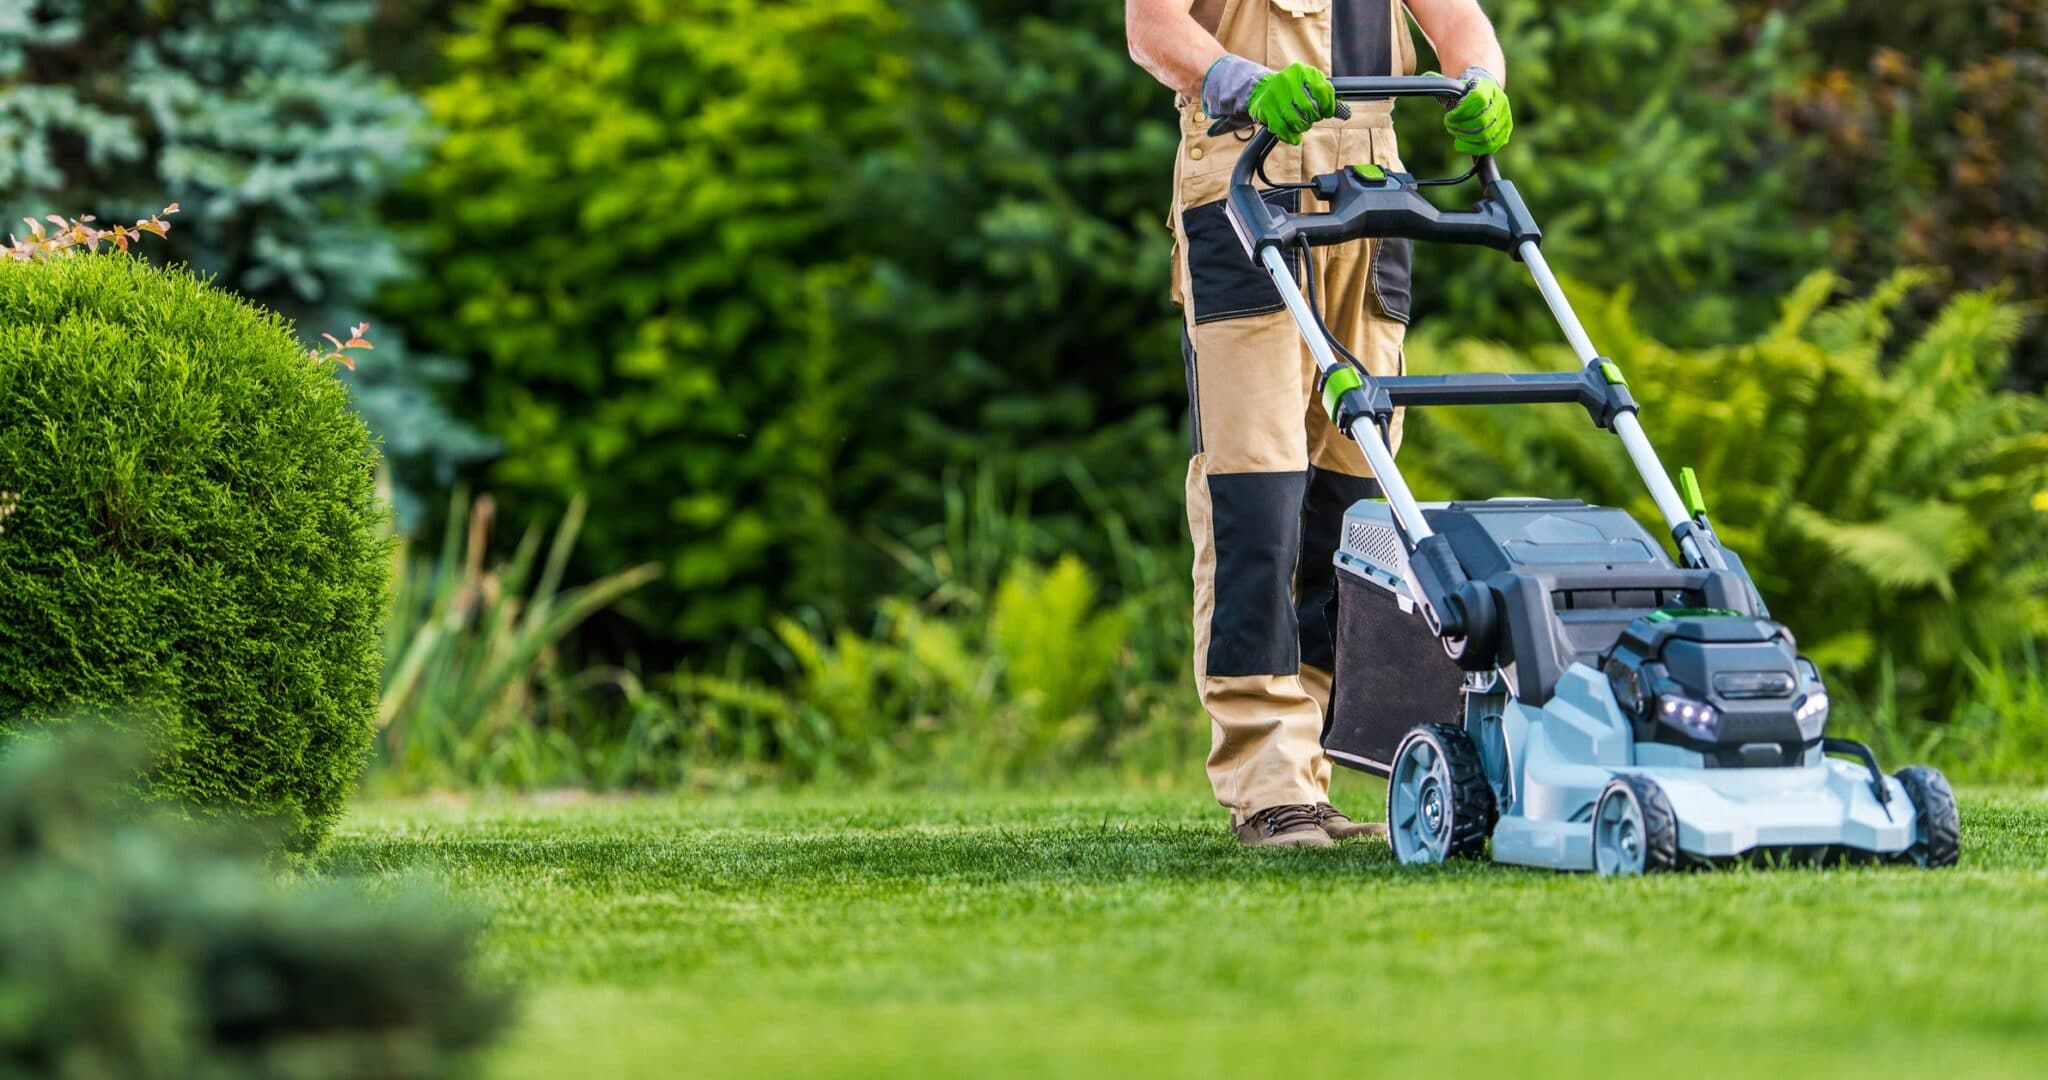 Top 7 Best Electric Grass Shears Review in 2021 